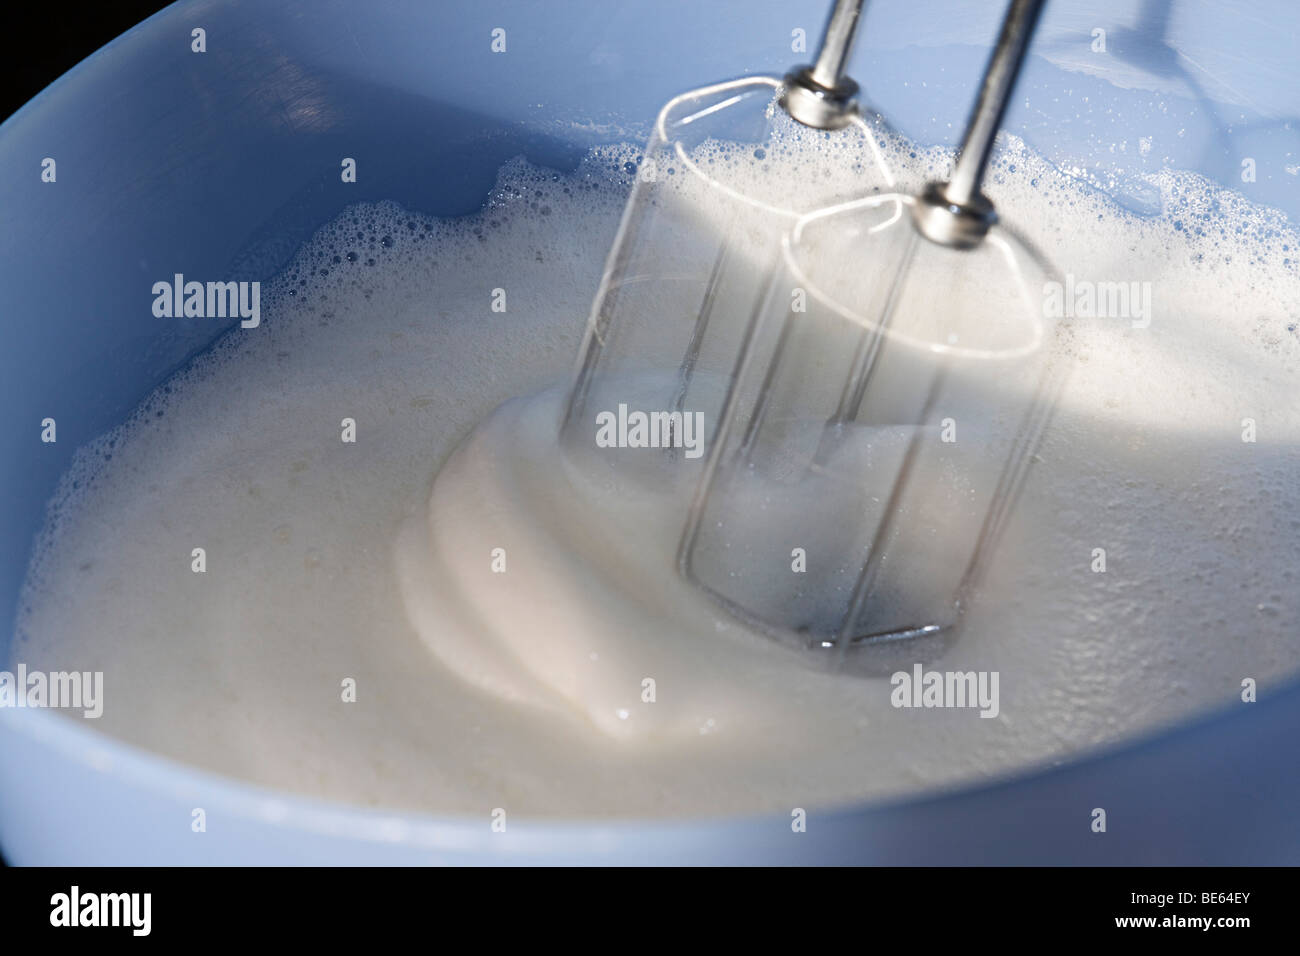 Beating egg whites in a mixing bowl with electric mixer. Stock Photo